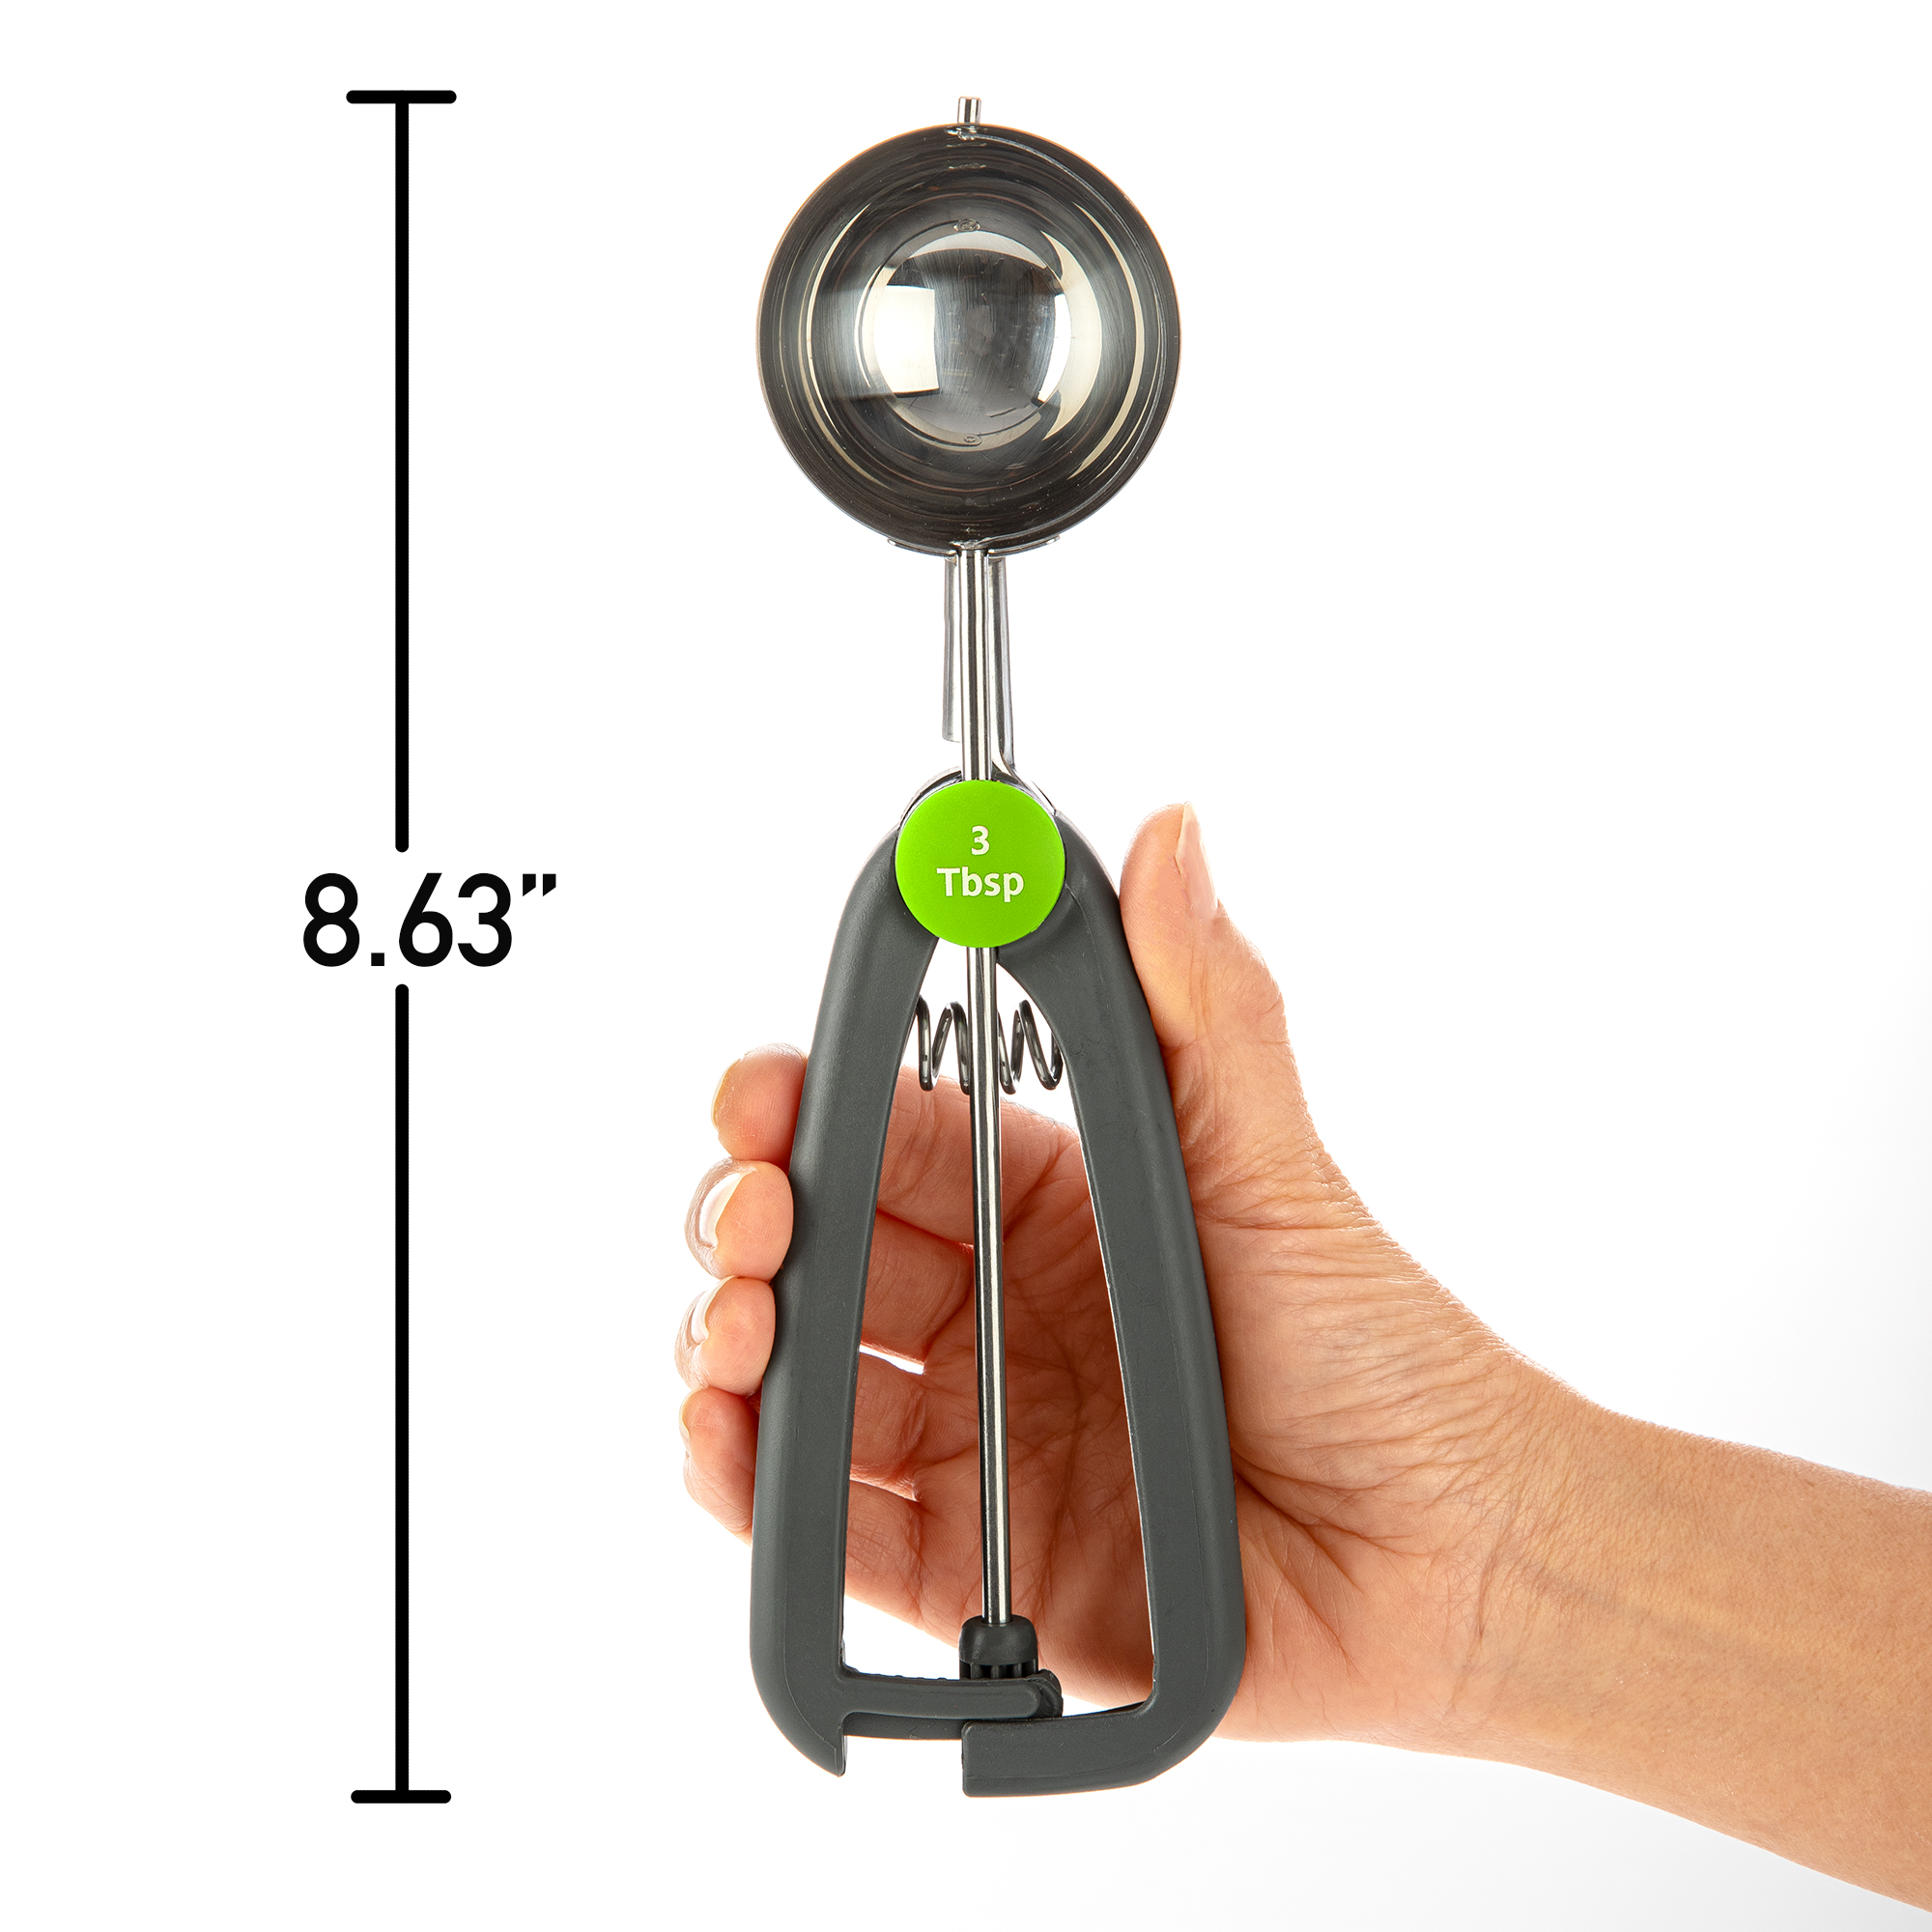 PrepSolutions Quick Release Stainless Steel Cookie Scoop - image 4 of 6